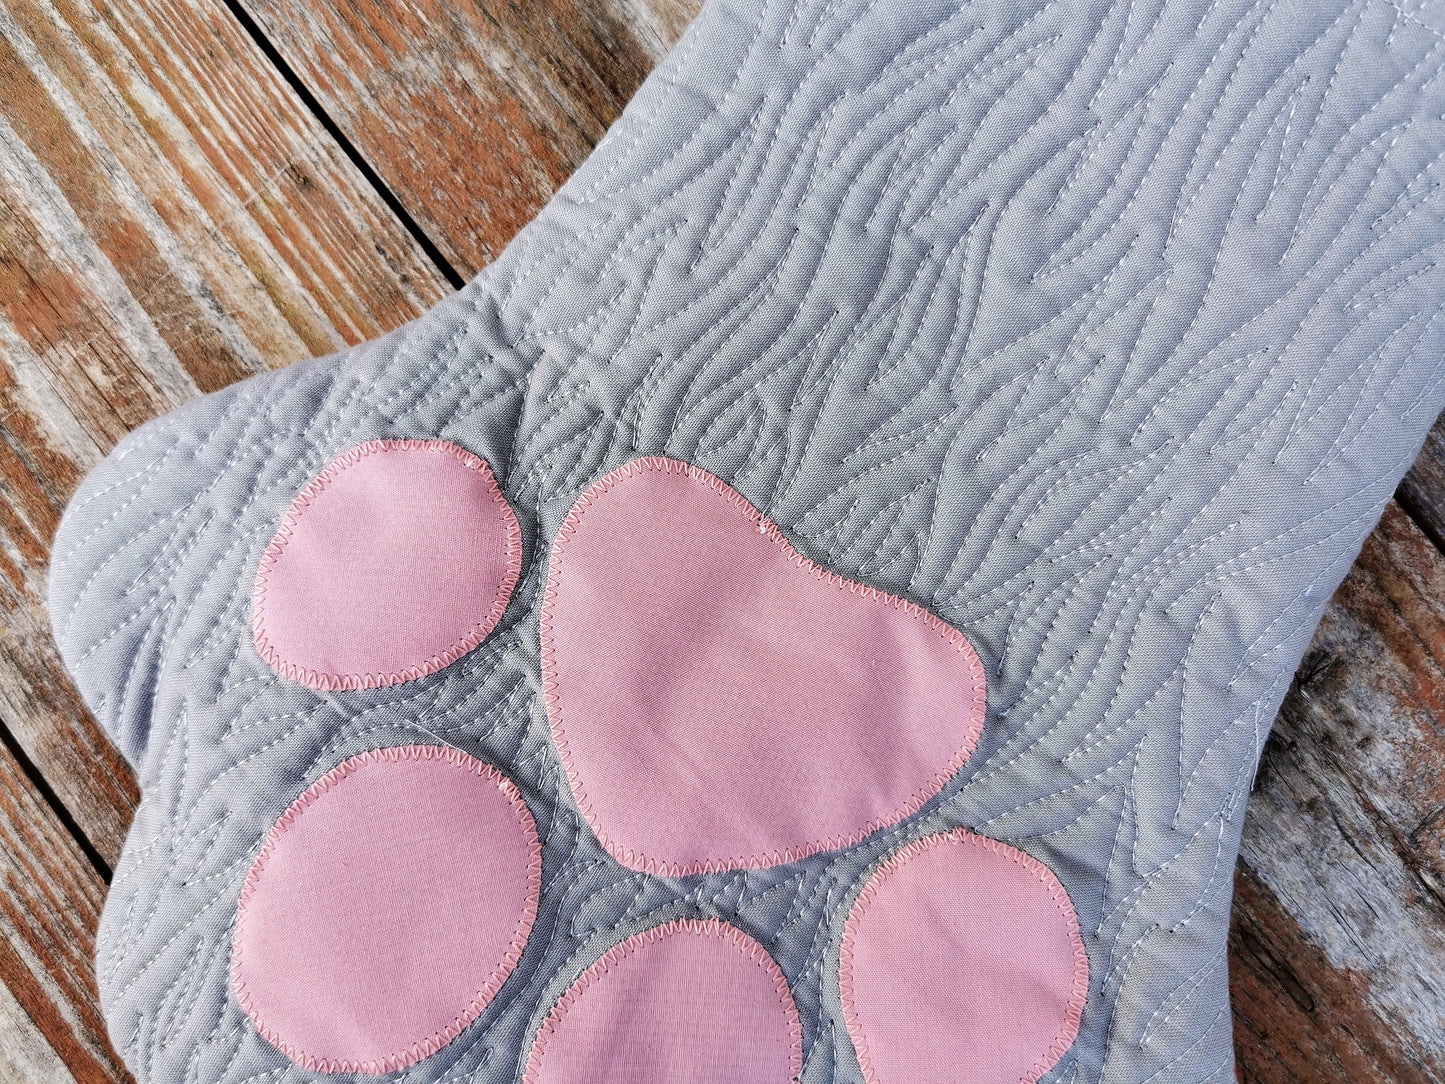 close up view of grey pet stocking showing fur like quilting and pink toes